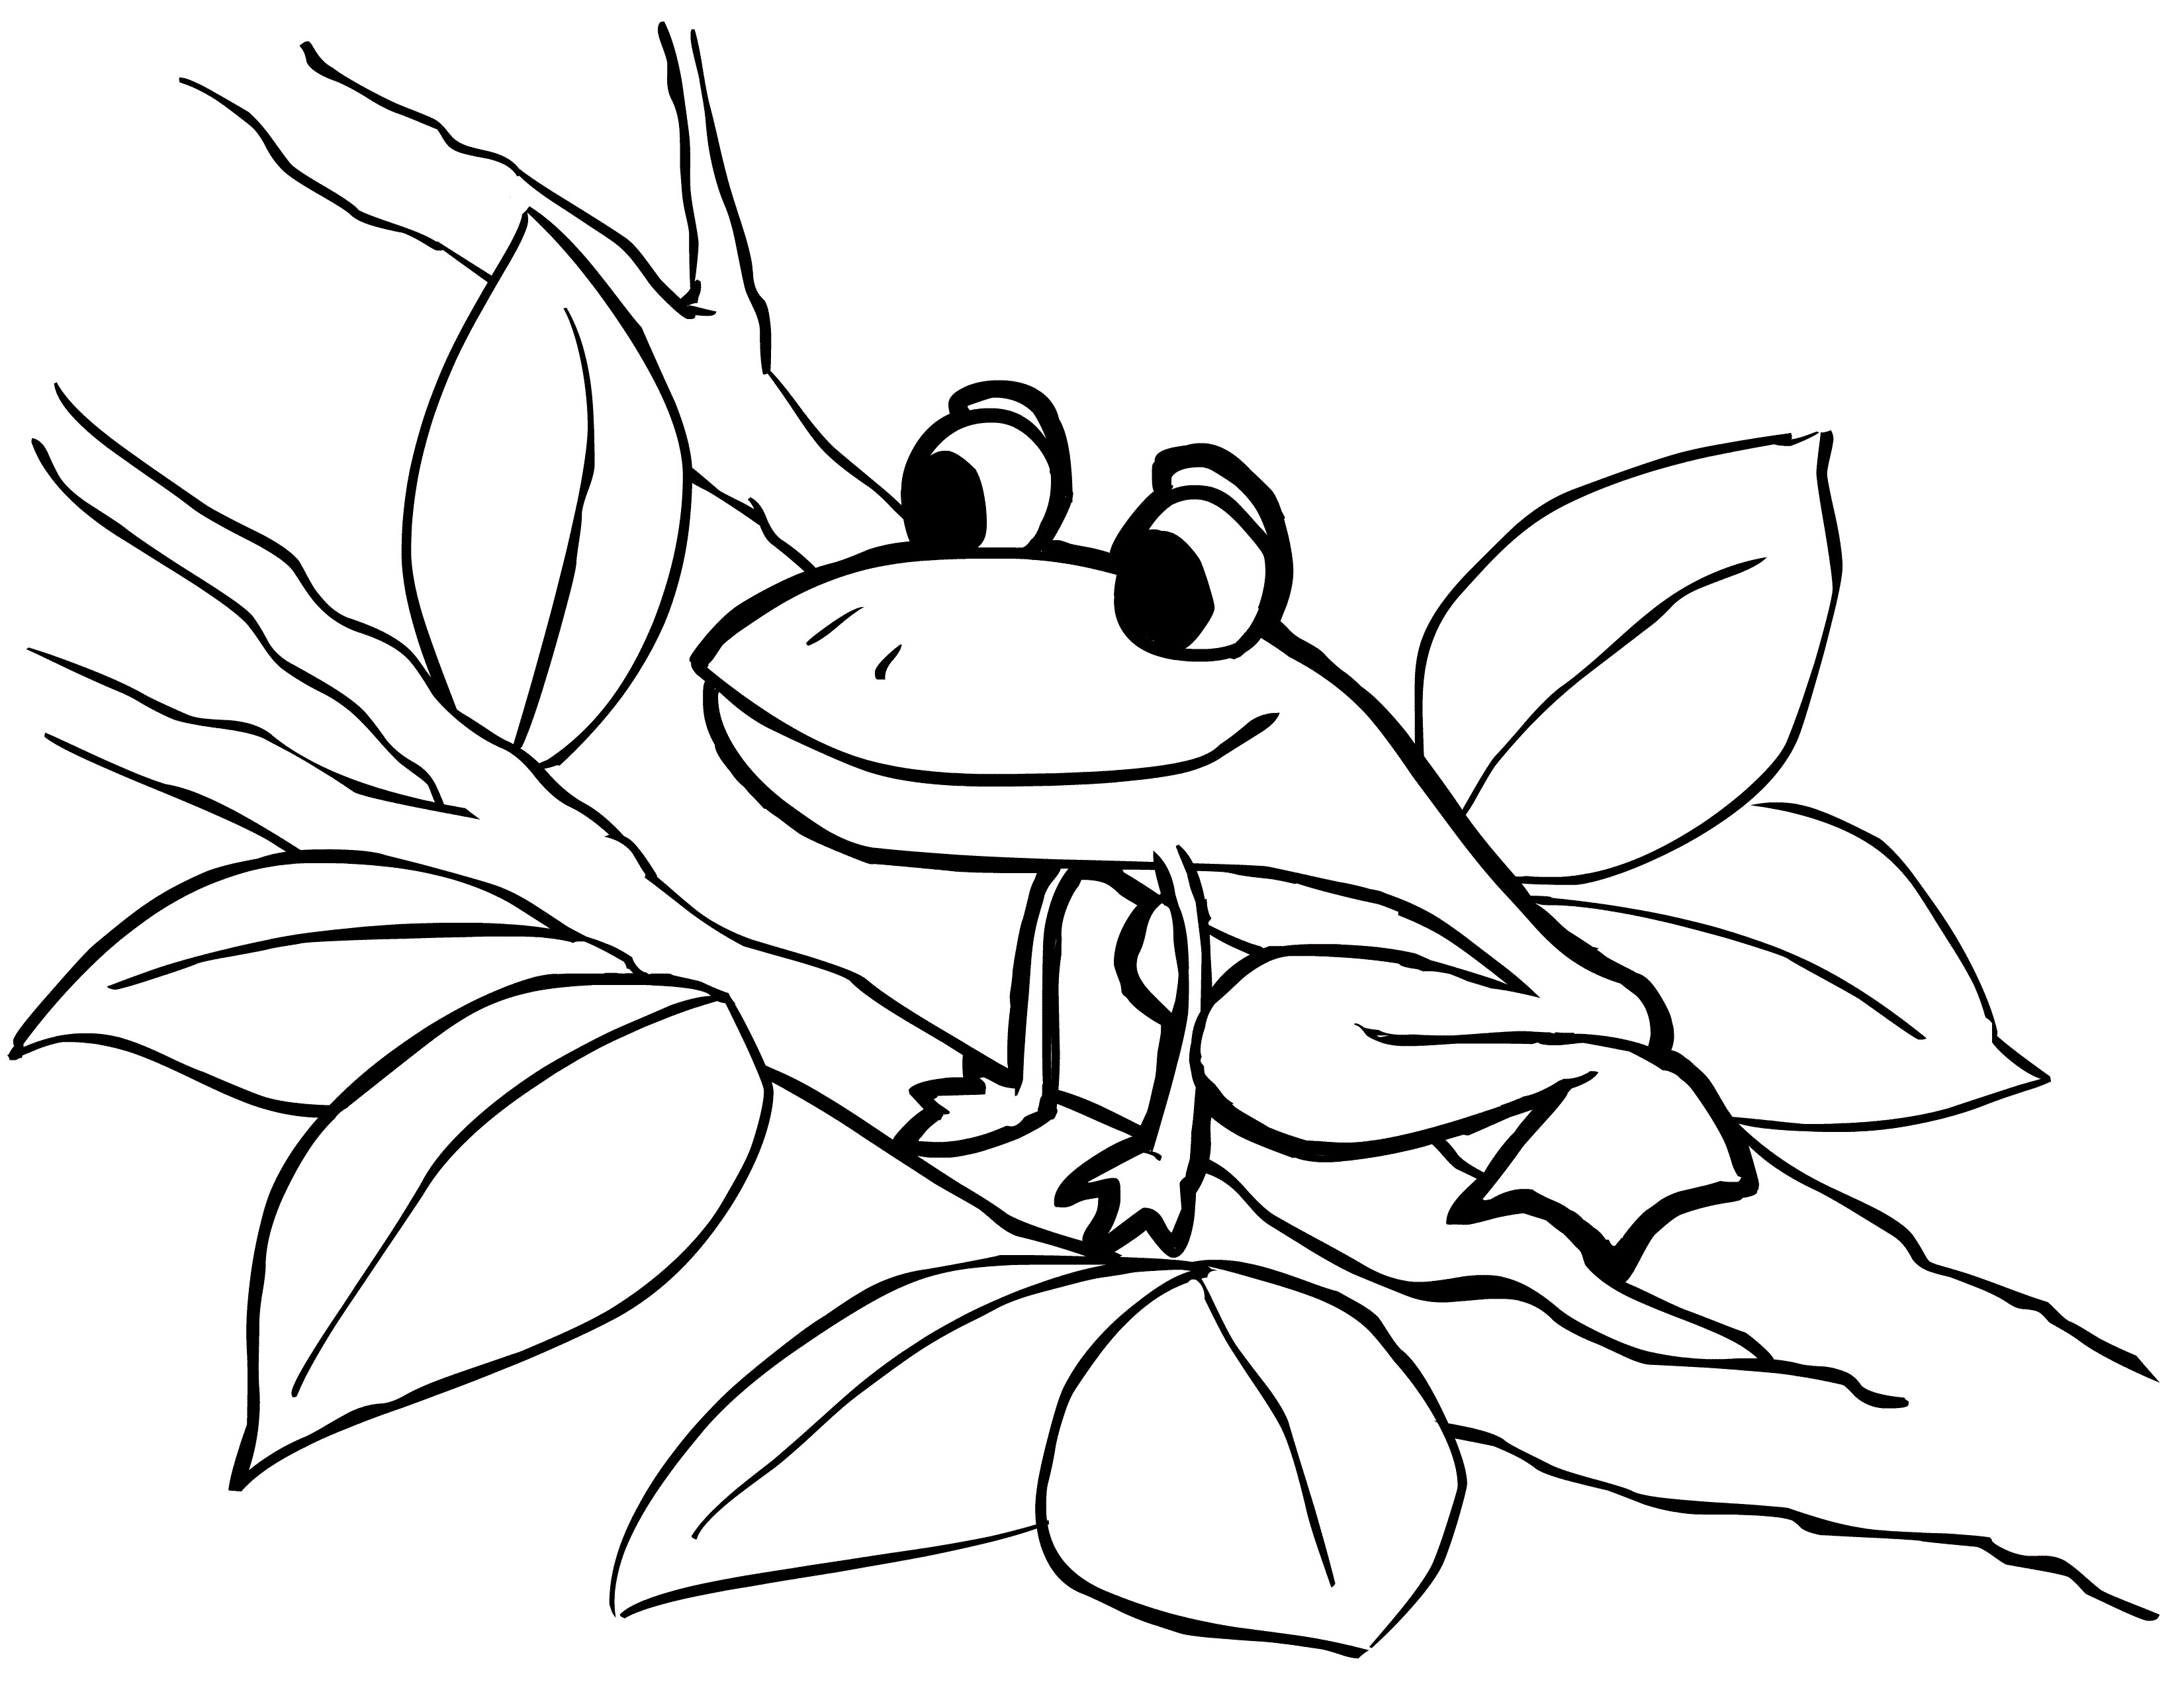 Frogs Coloring Pages
 Free Printable Frog Coloring Pages For Kids